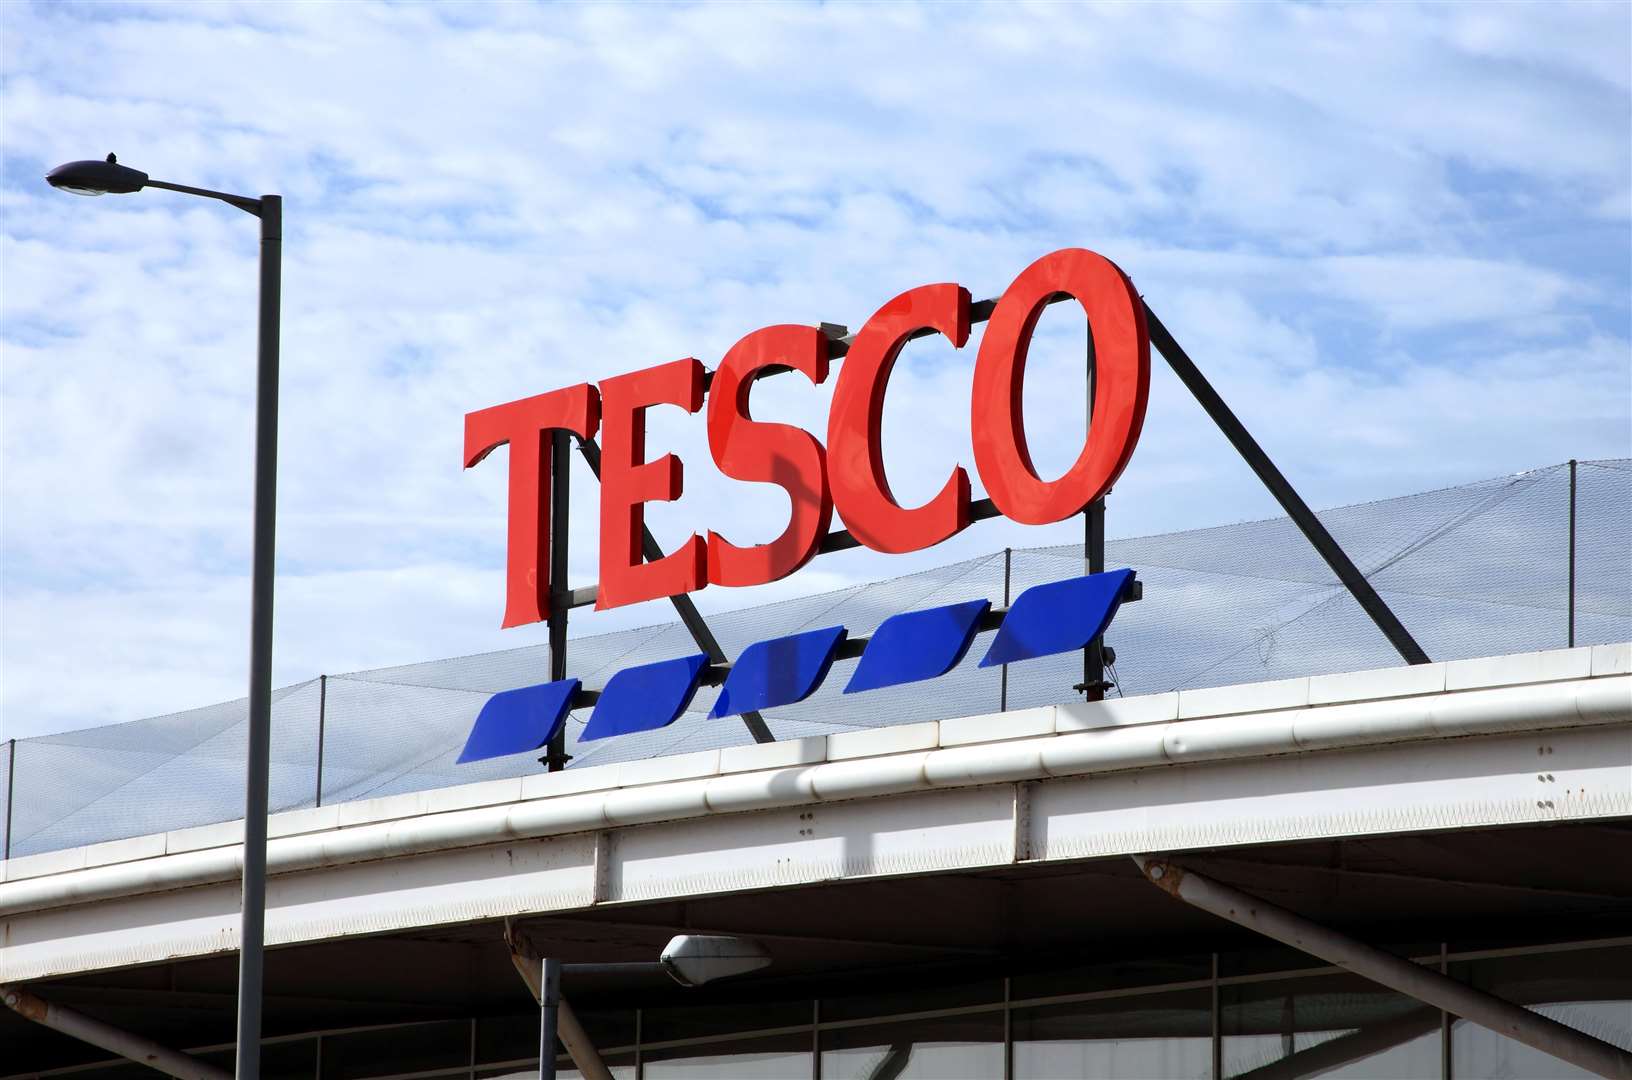 Tesco was one supermarket that was targeted. Stock picture